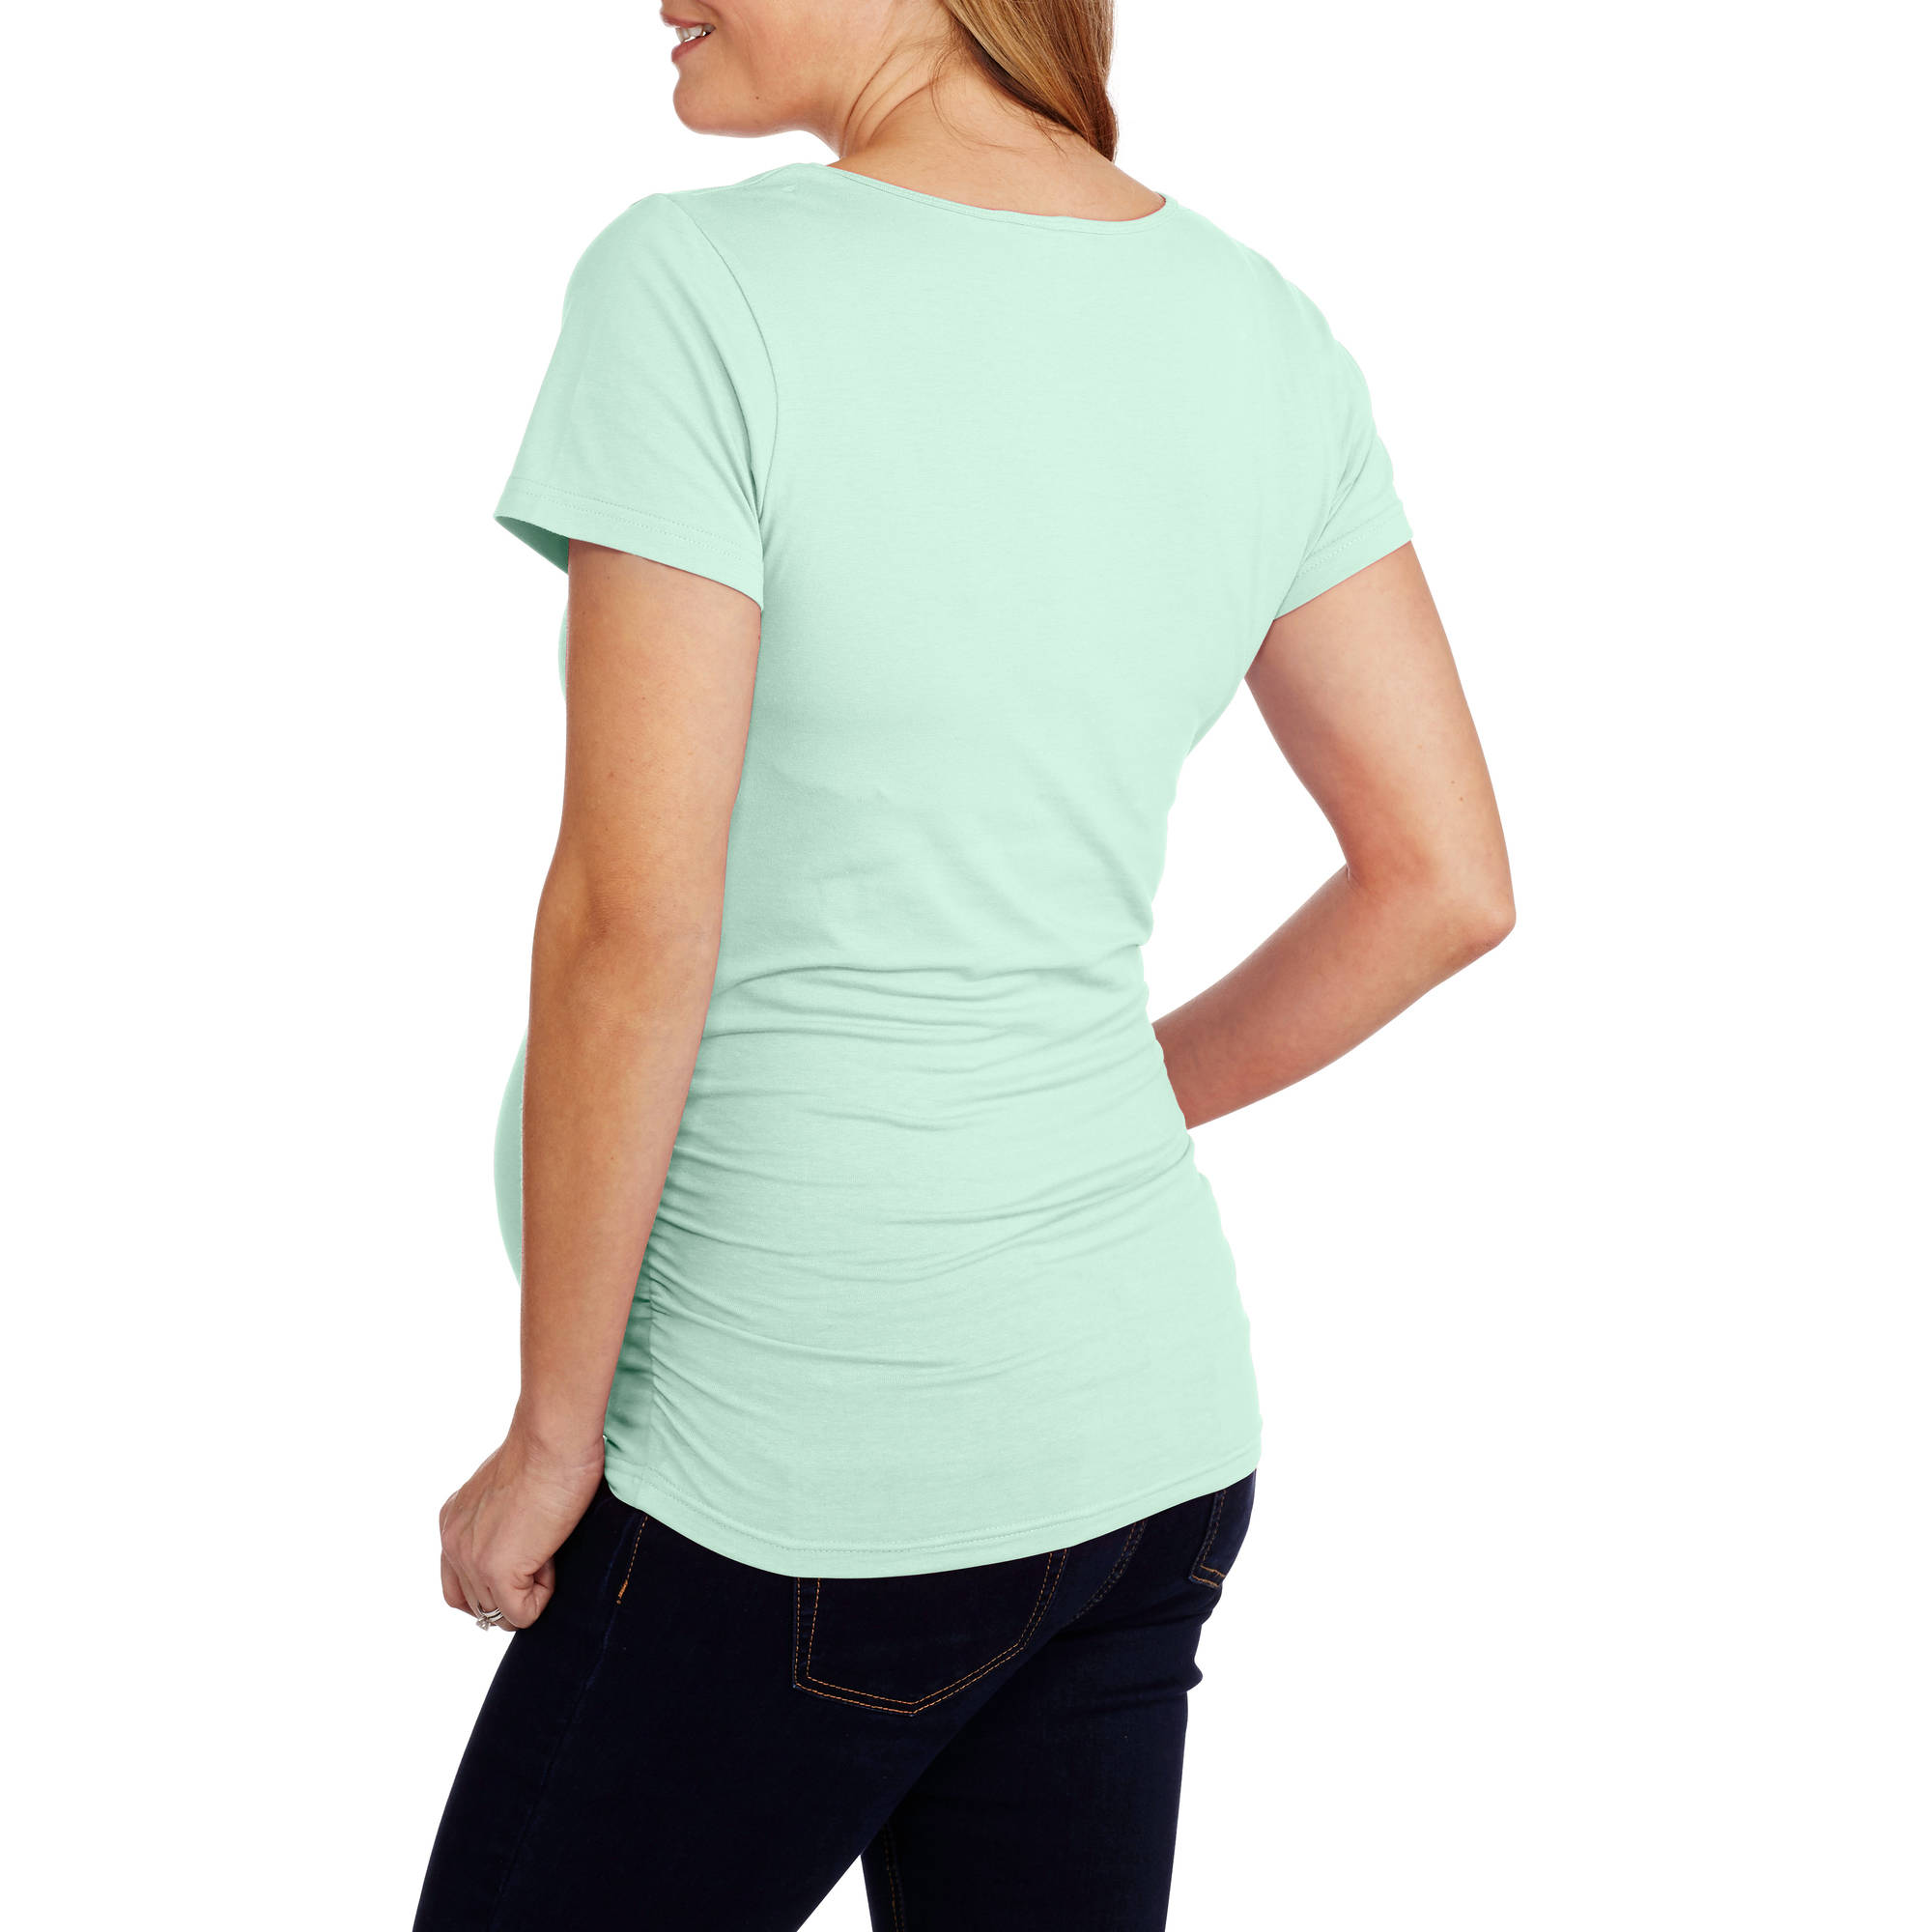 Oh! Mamma Maternity Short Sleeve Tee With Flattering Side Ruching - Available in Plus Sizes - image 2 of 2